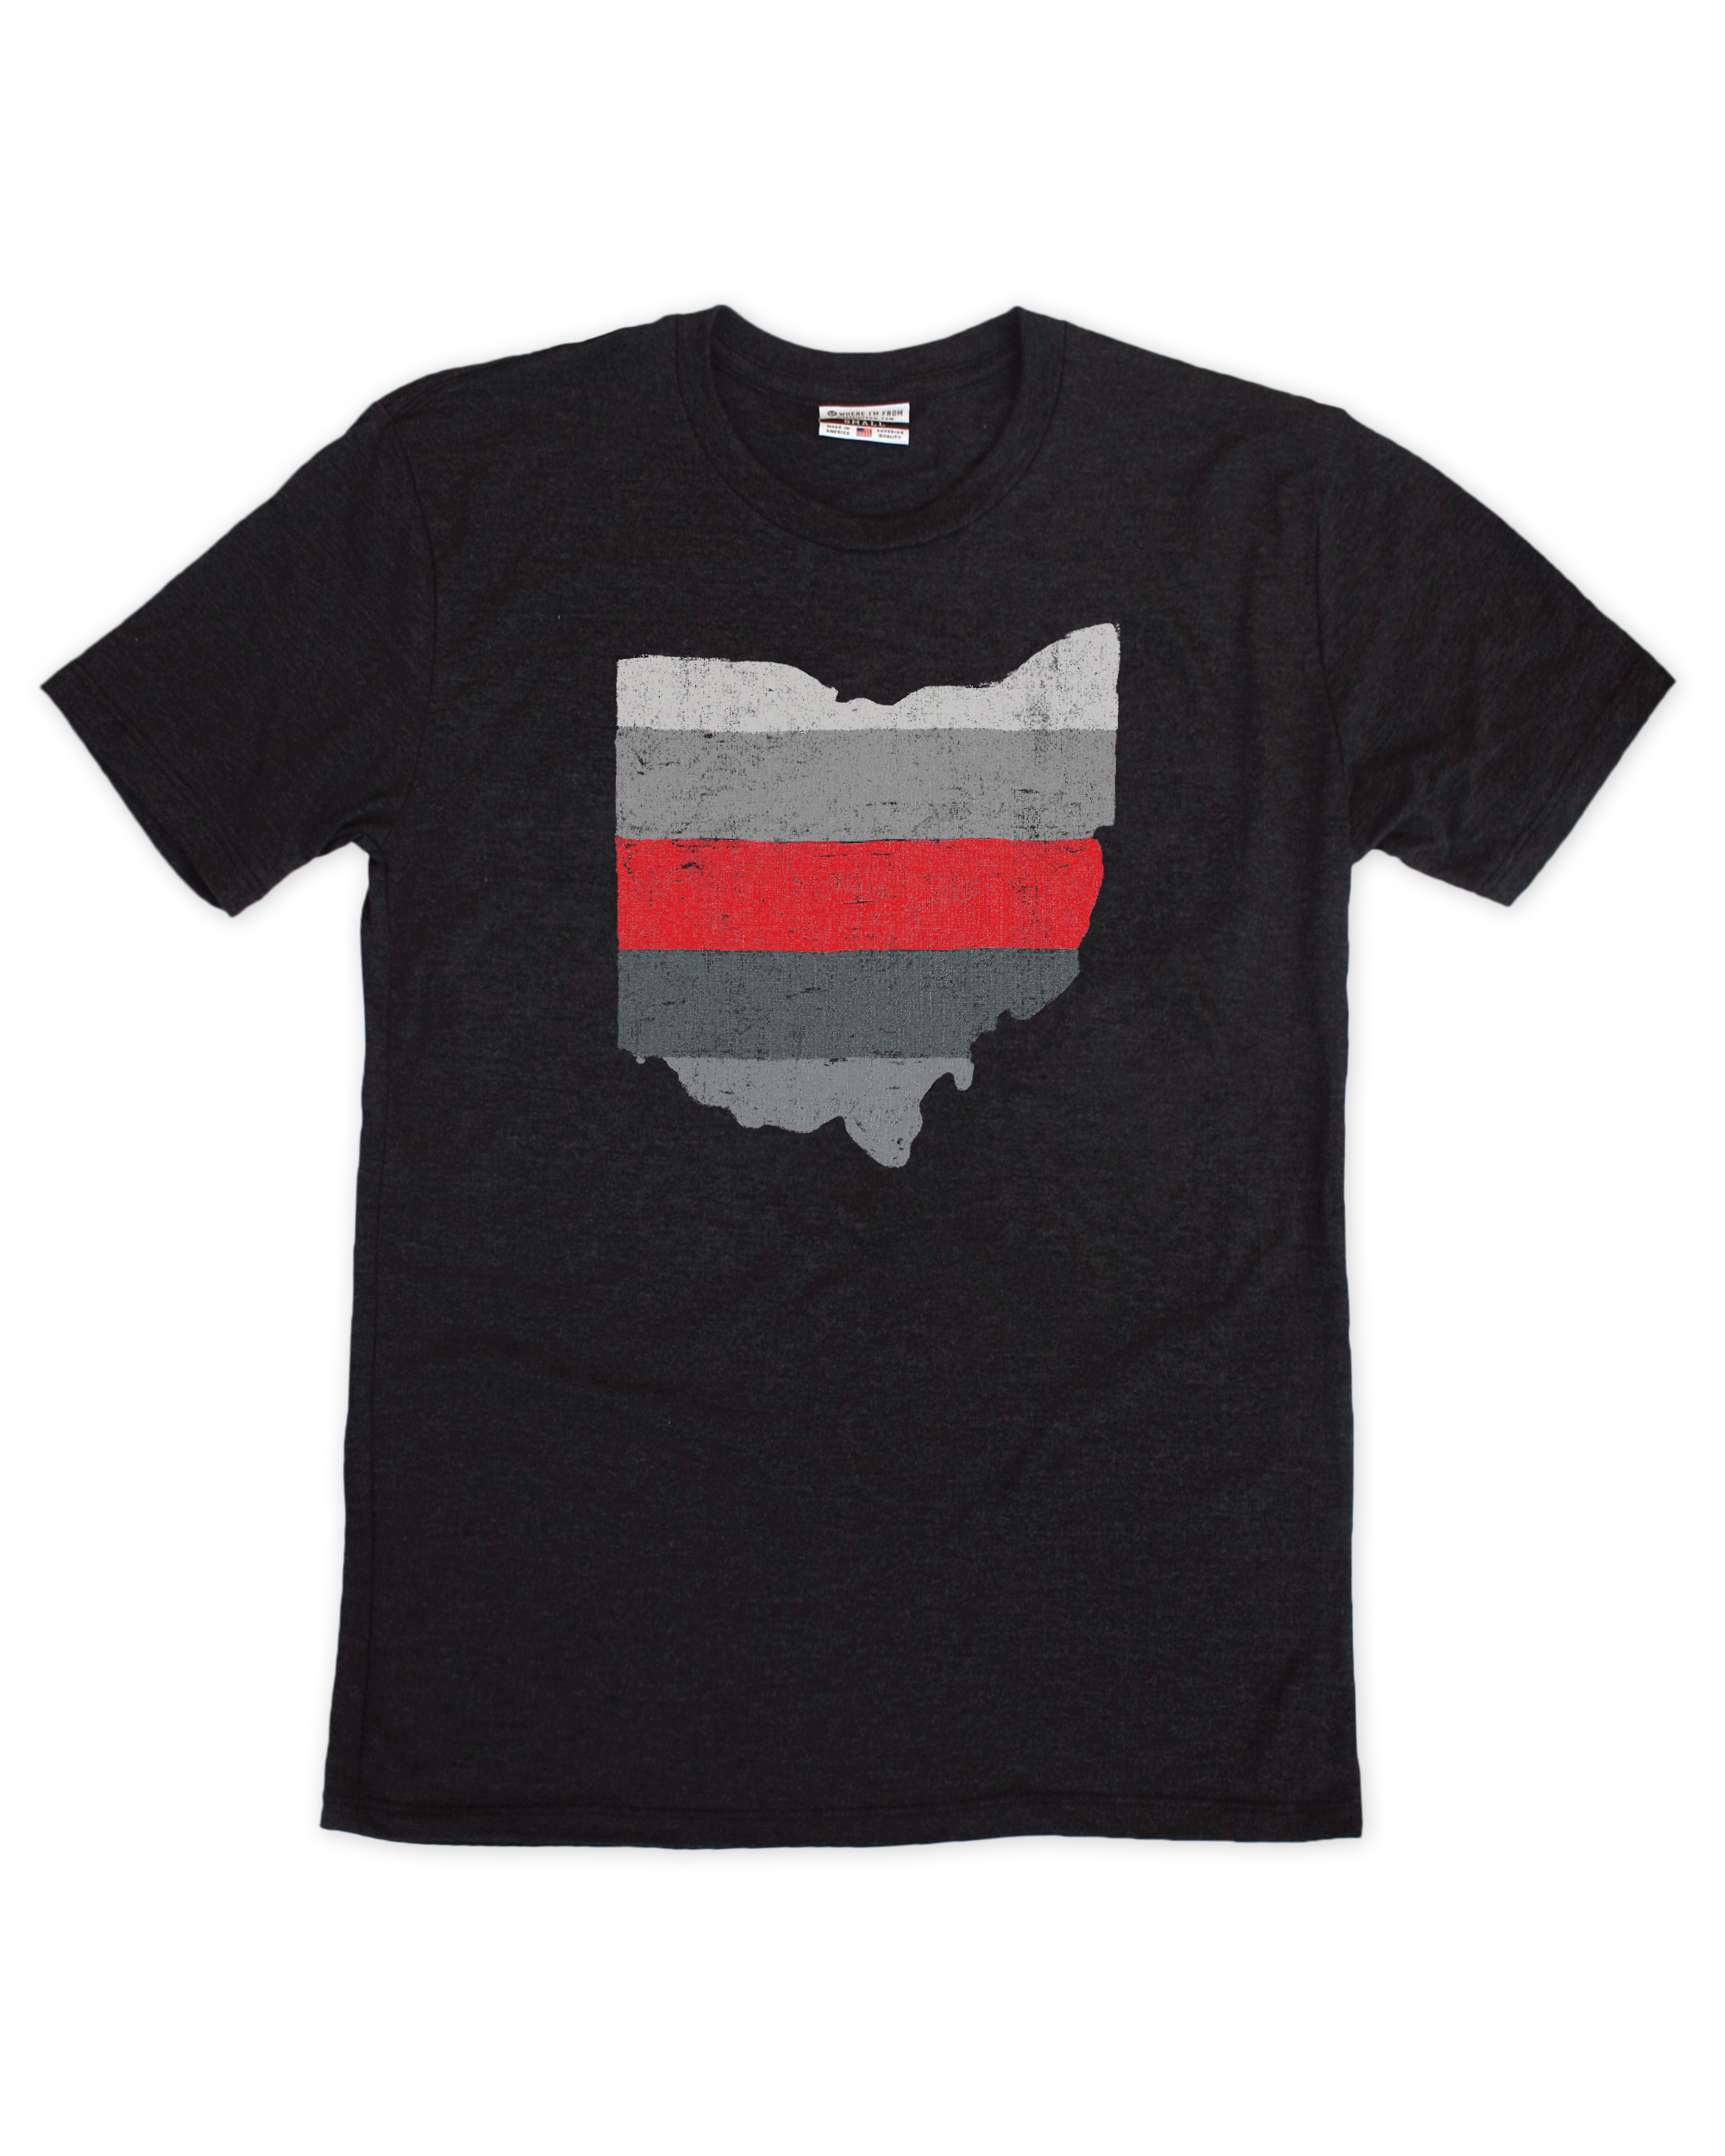 State Stripe T-Shirt - Where I'm From